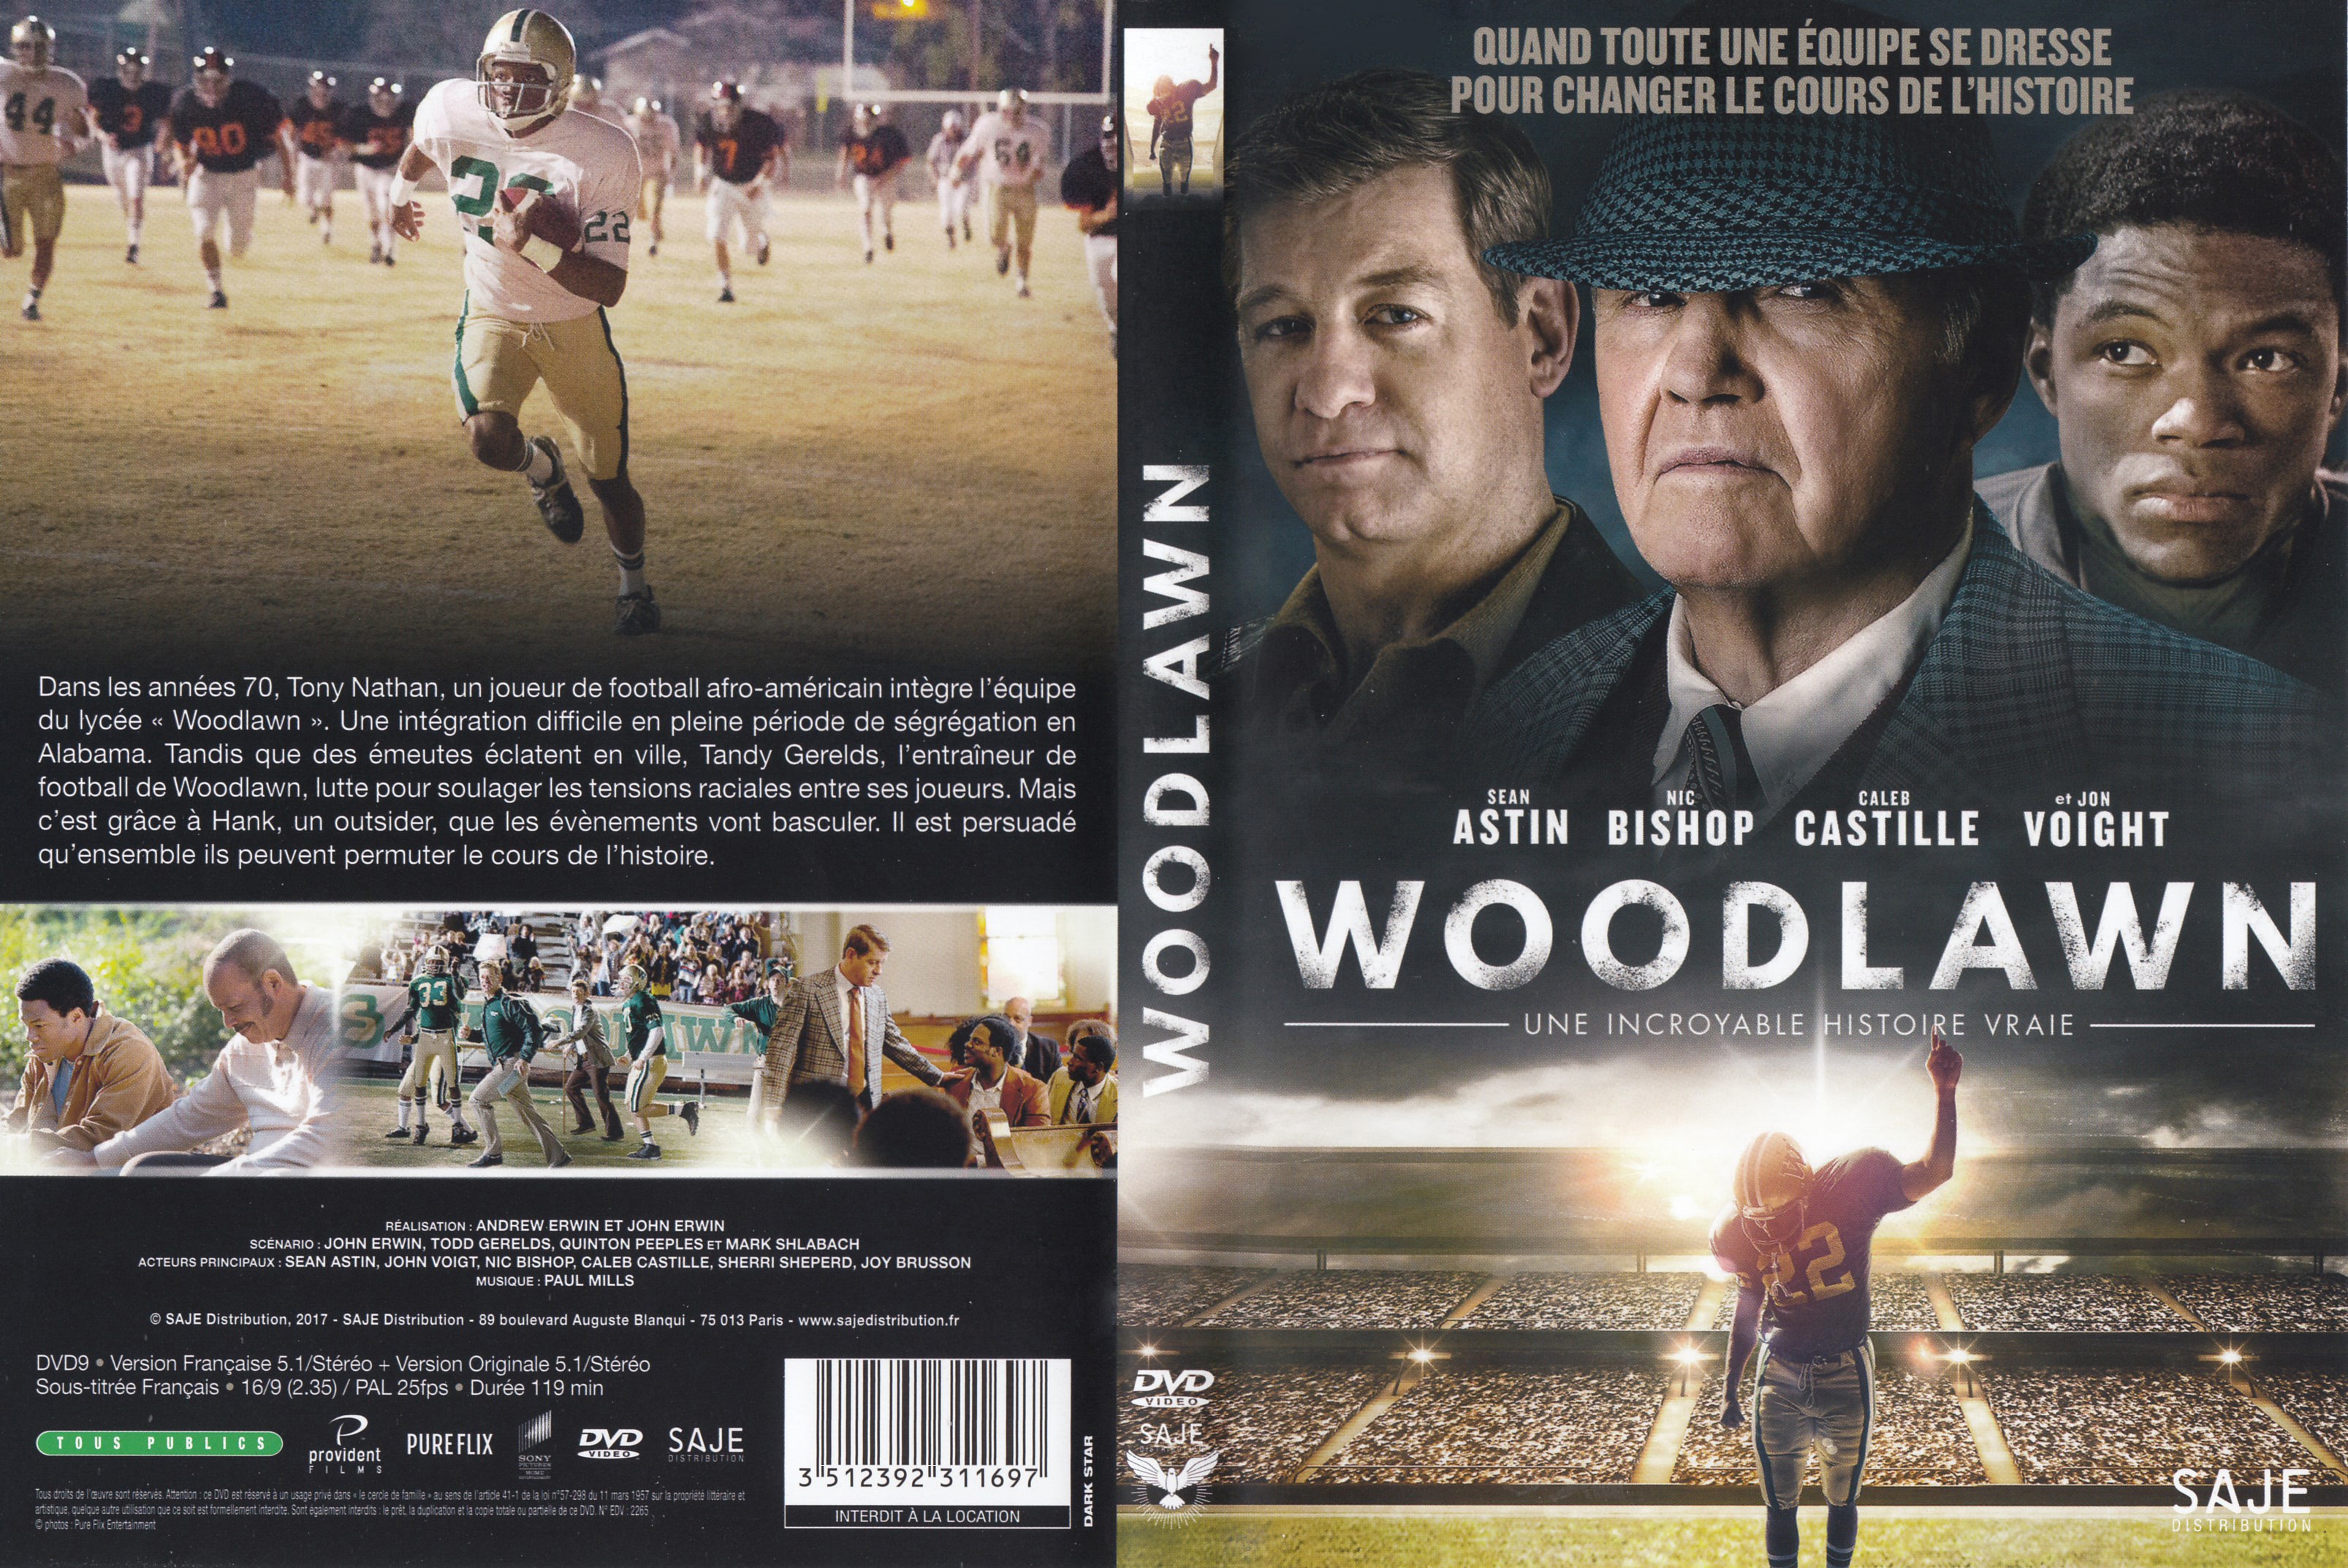 Jaquette DVD Woodlawn